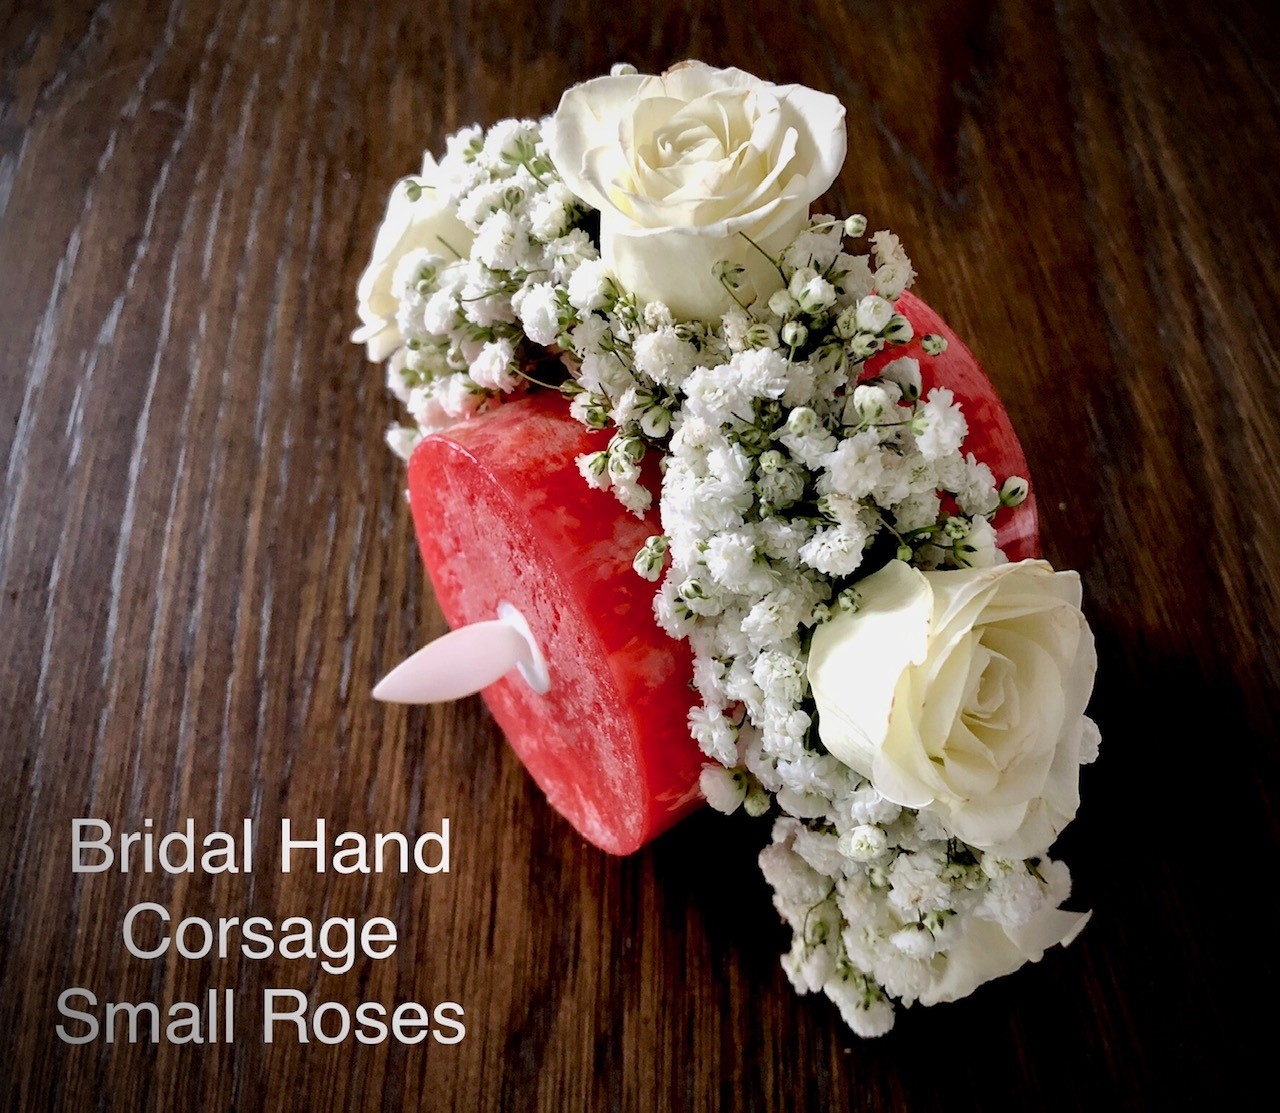 $30 each Bridal hand corsage small roses                           